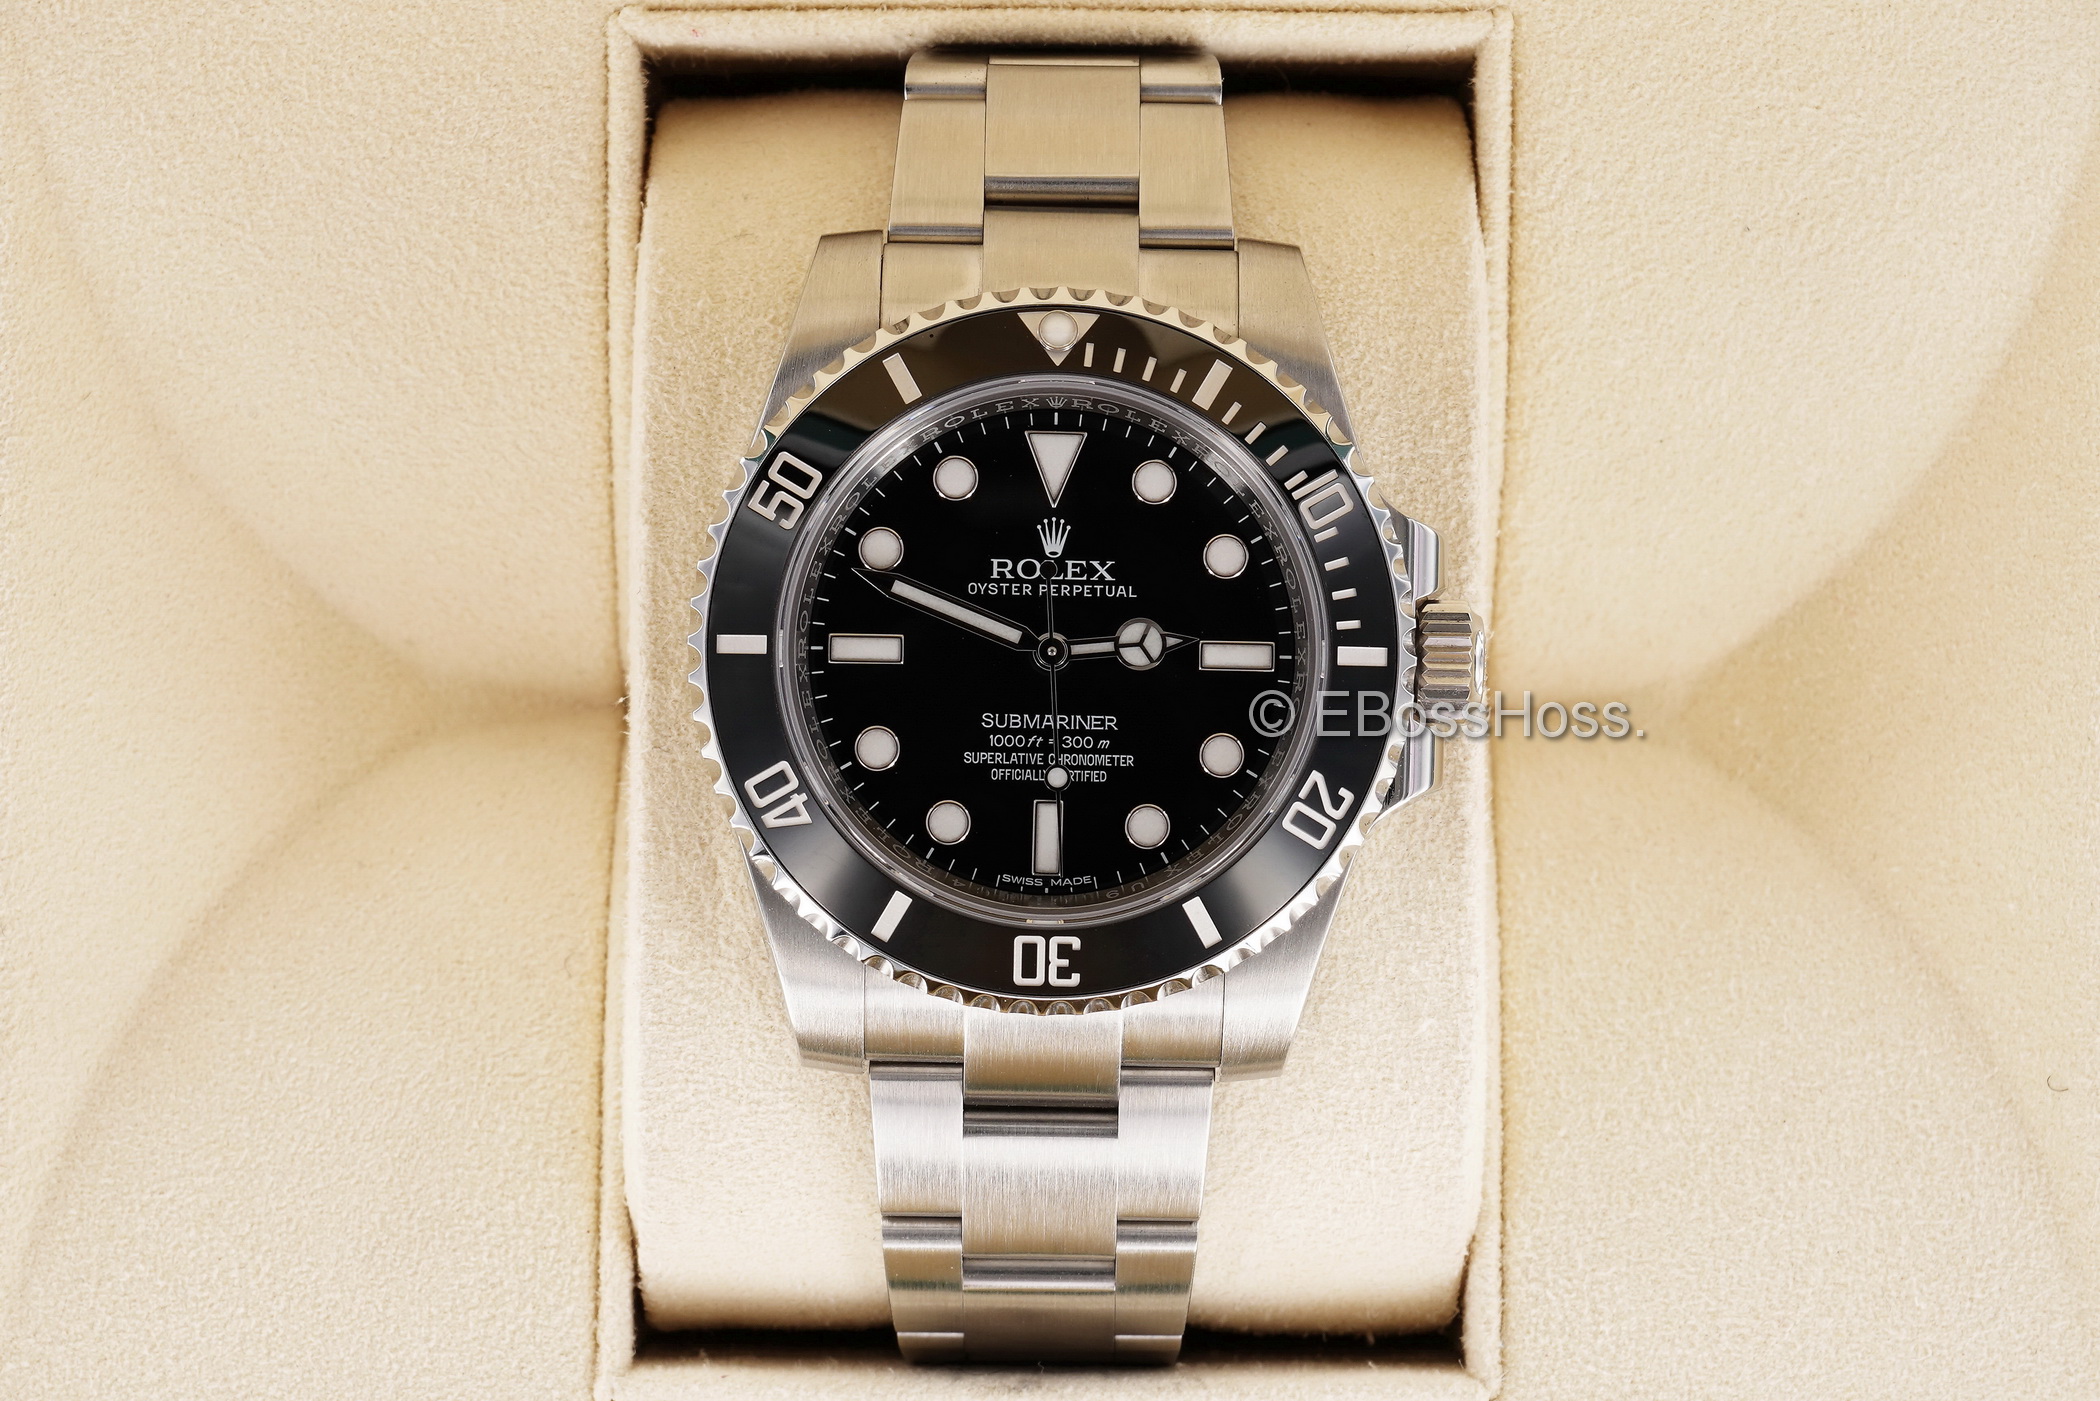 Stainless-Steel No-Date Submariner - 114060LN